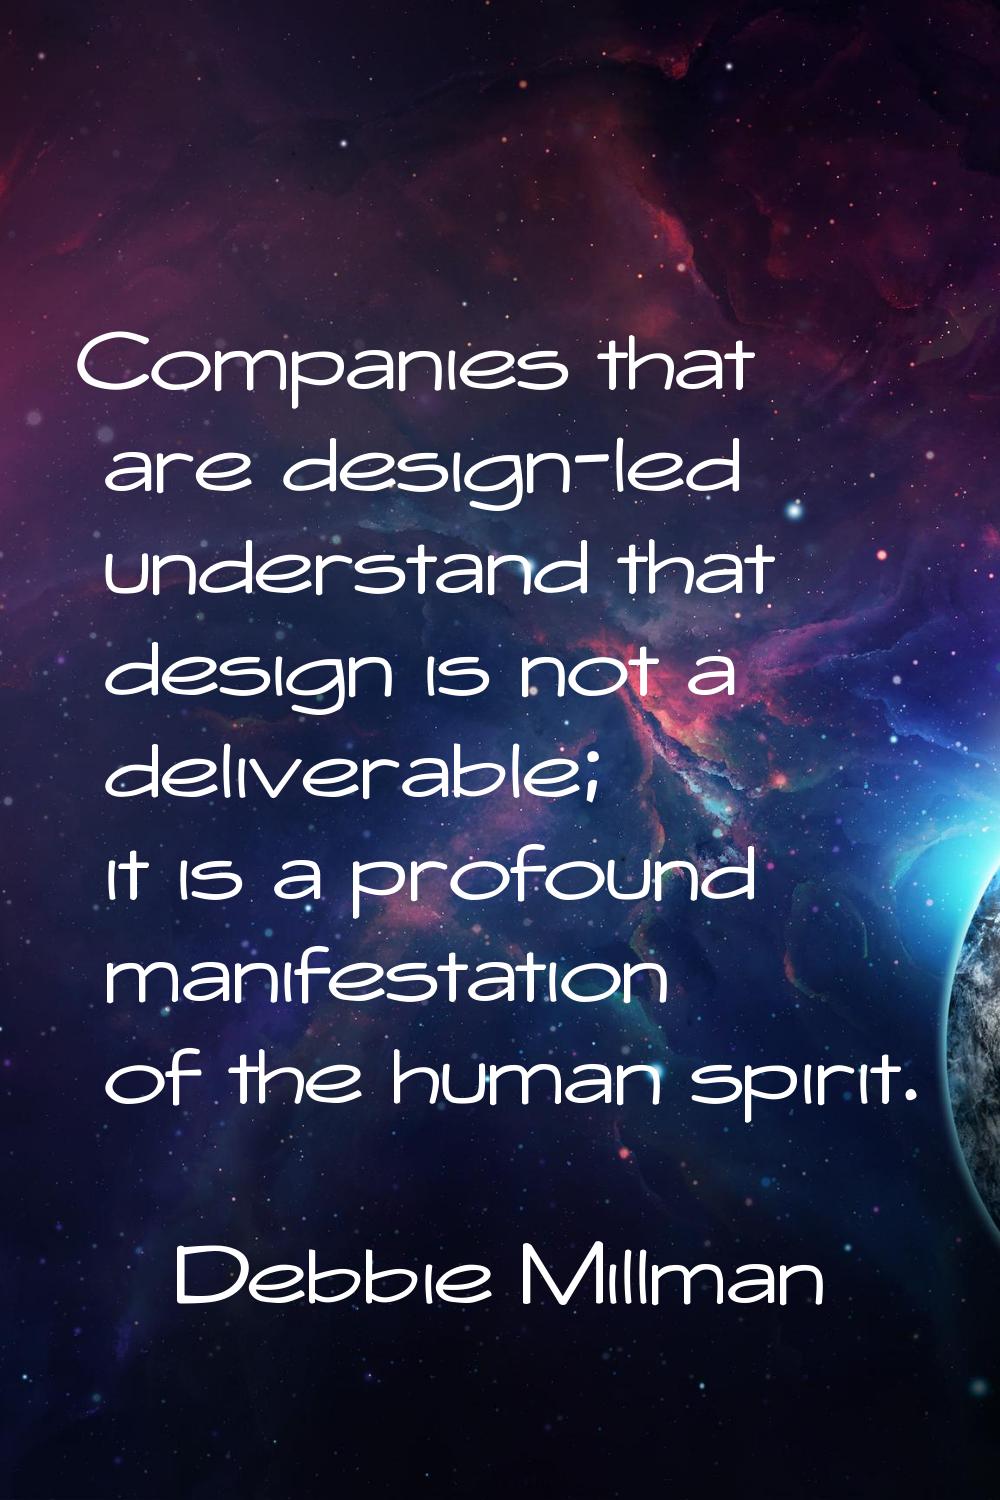 Companies that are design-led understand that design is not a deliverable; it is a profound manifes